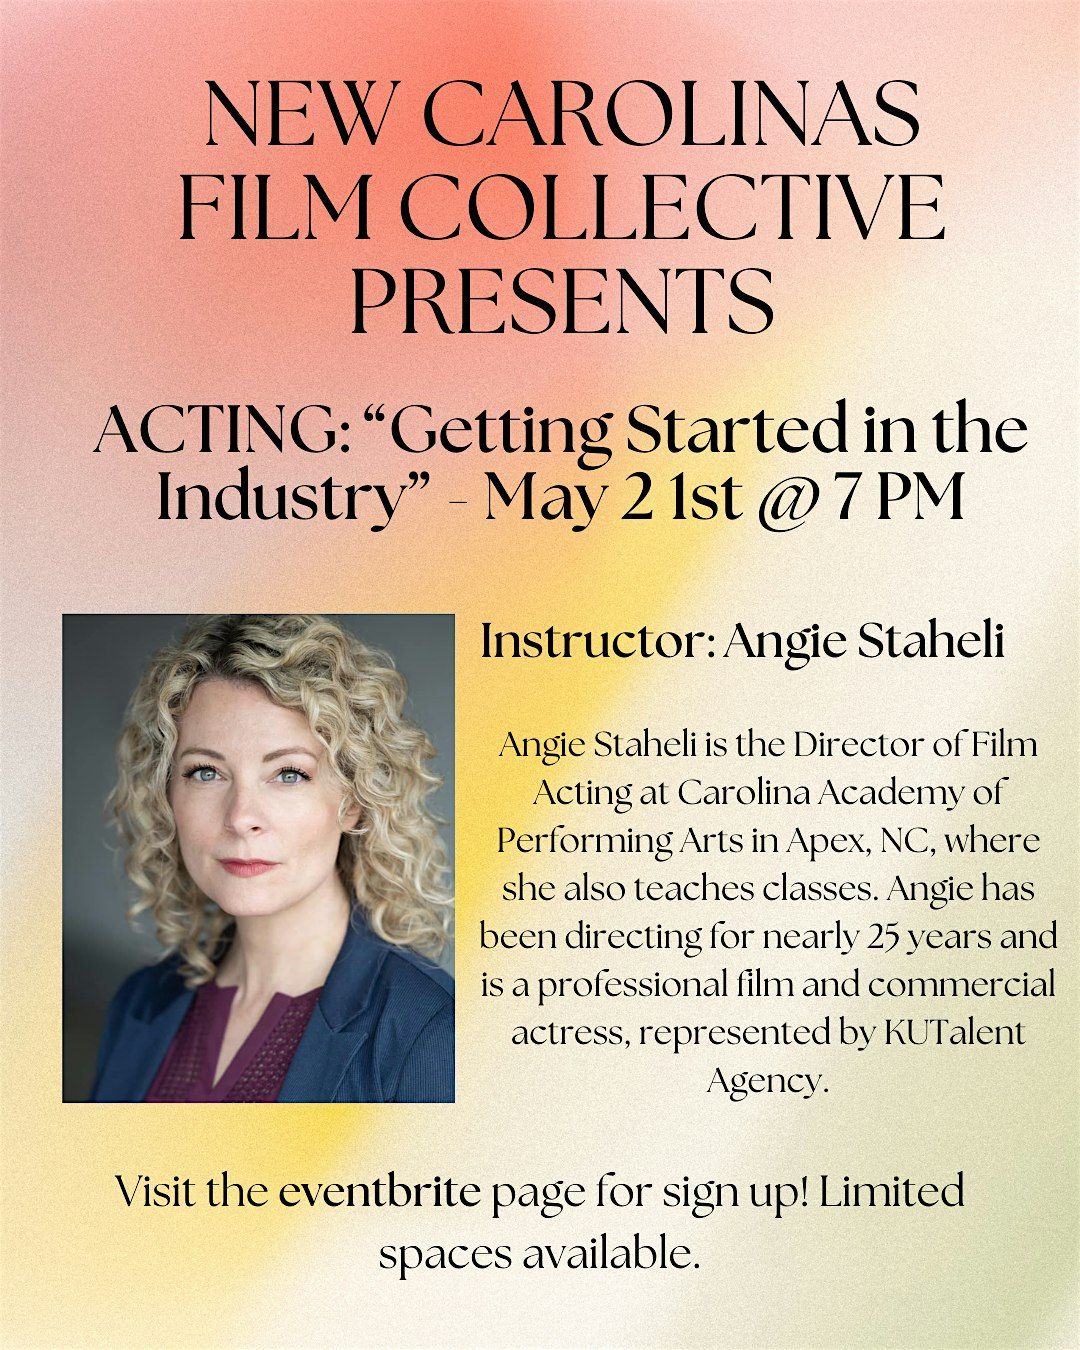 NCFC Workshops: "Acting: Getting Started in the Industry" by Angie Staheli